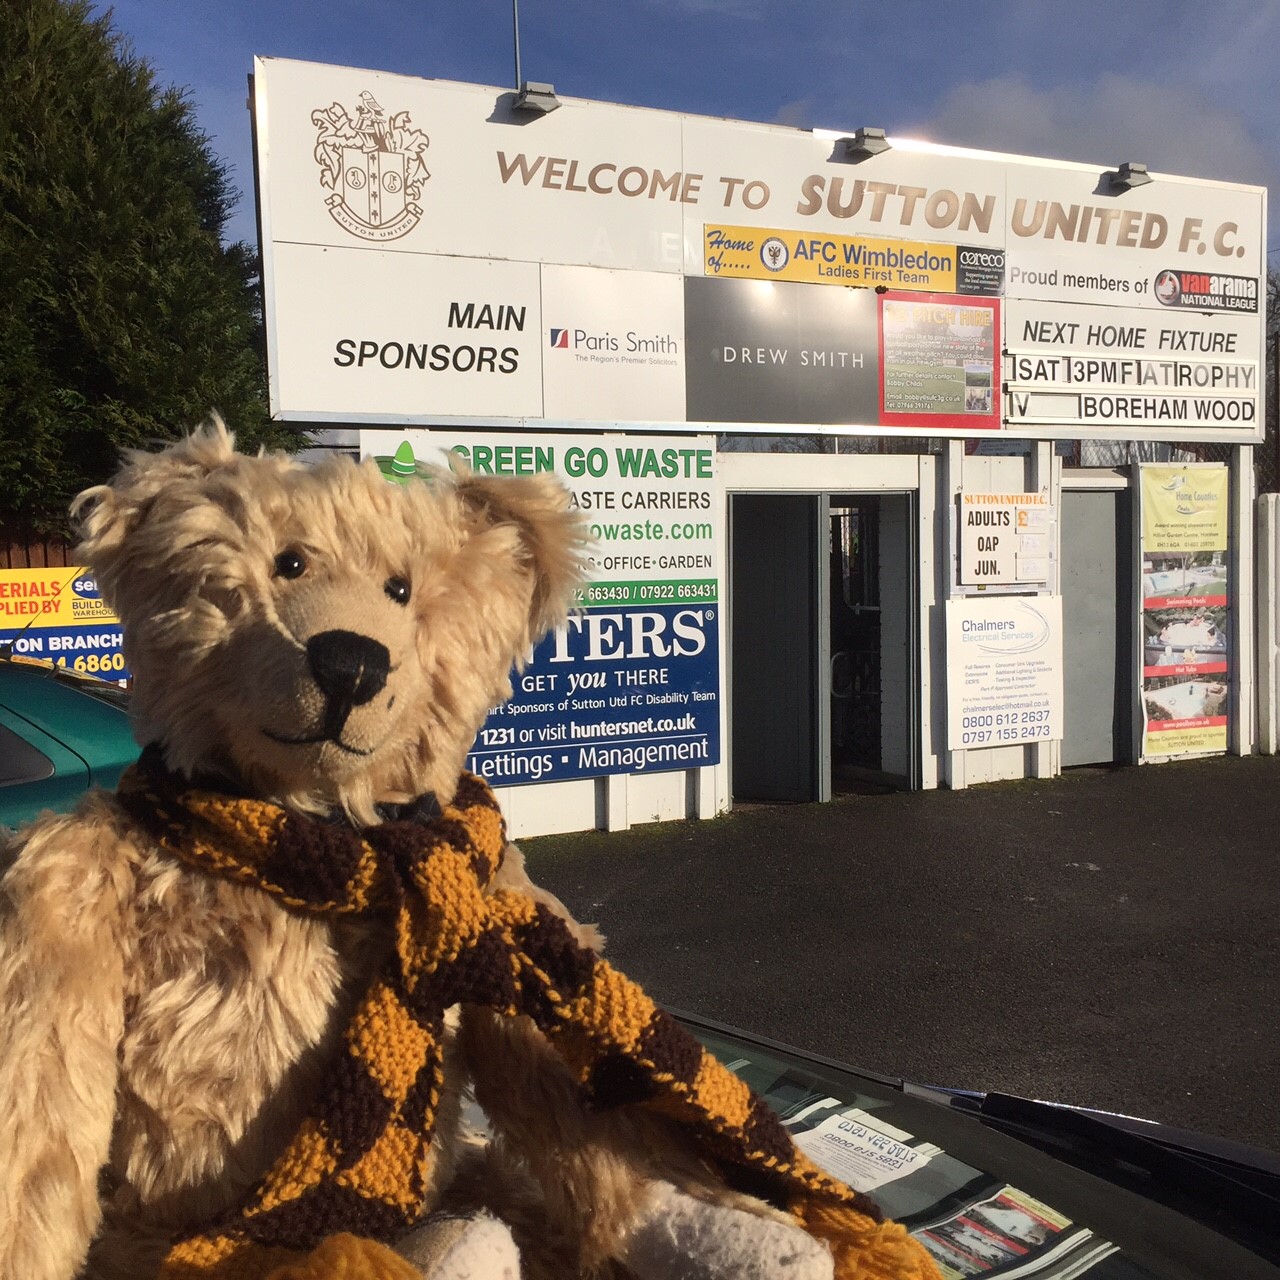 Sutton United: Outside Home!